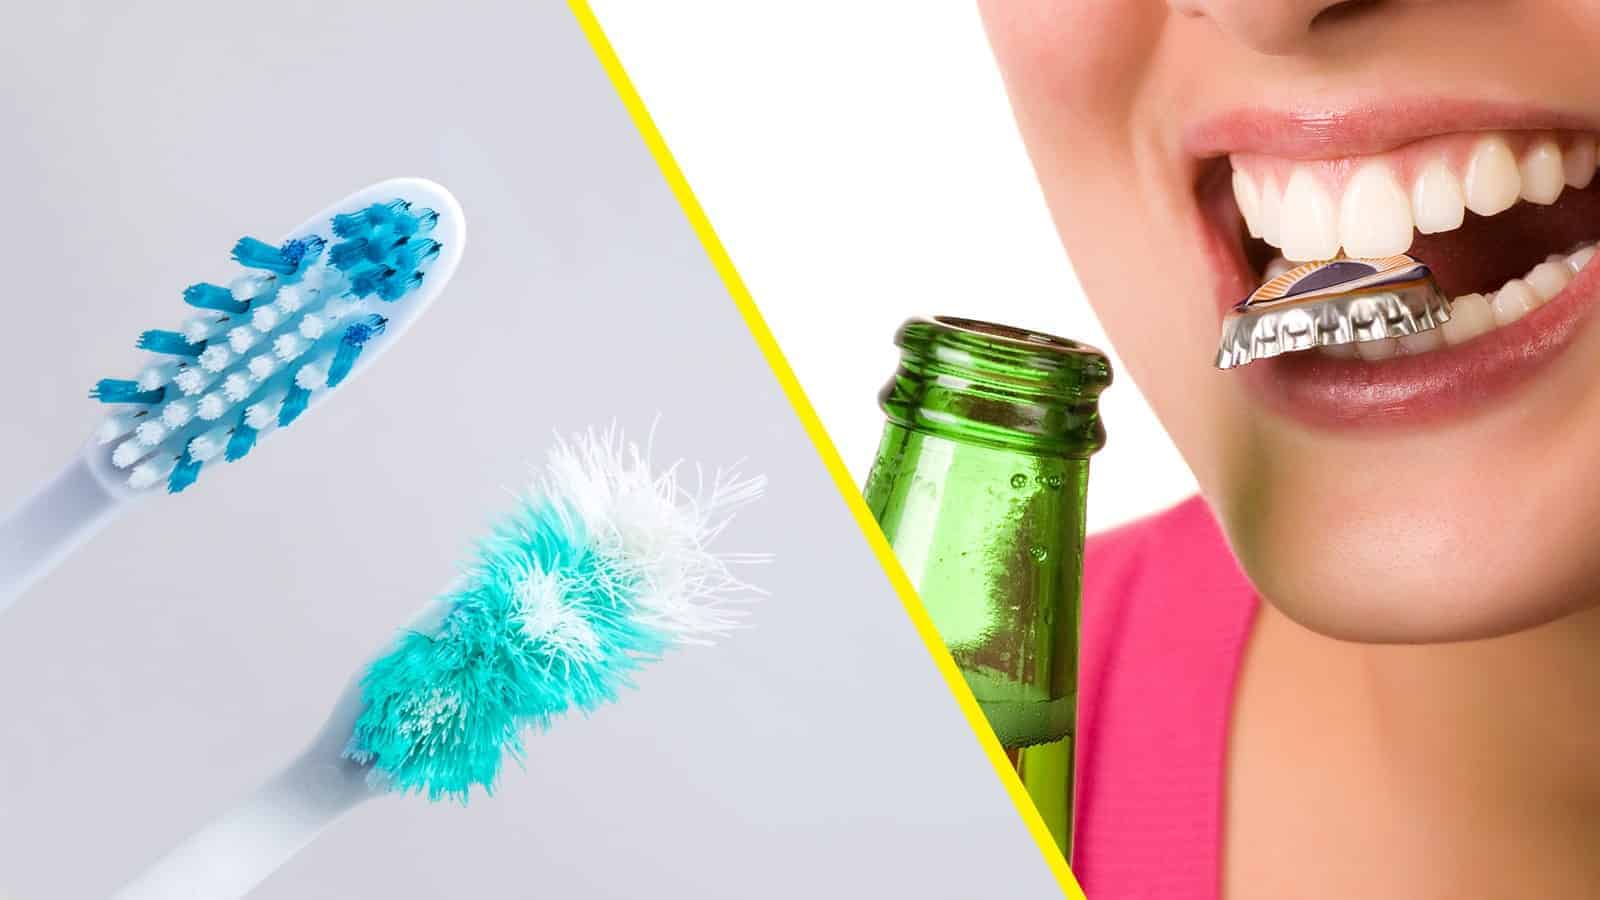 Dentists Explain 9 Things to Never Do to Your Teeth